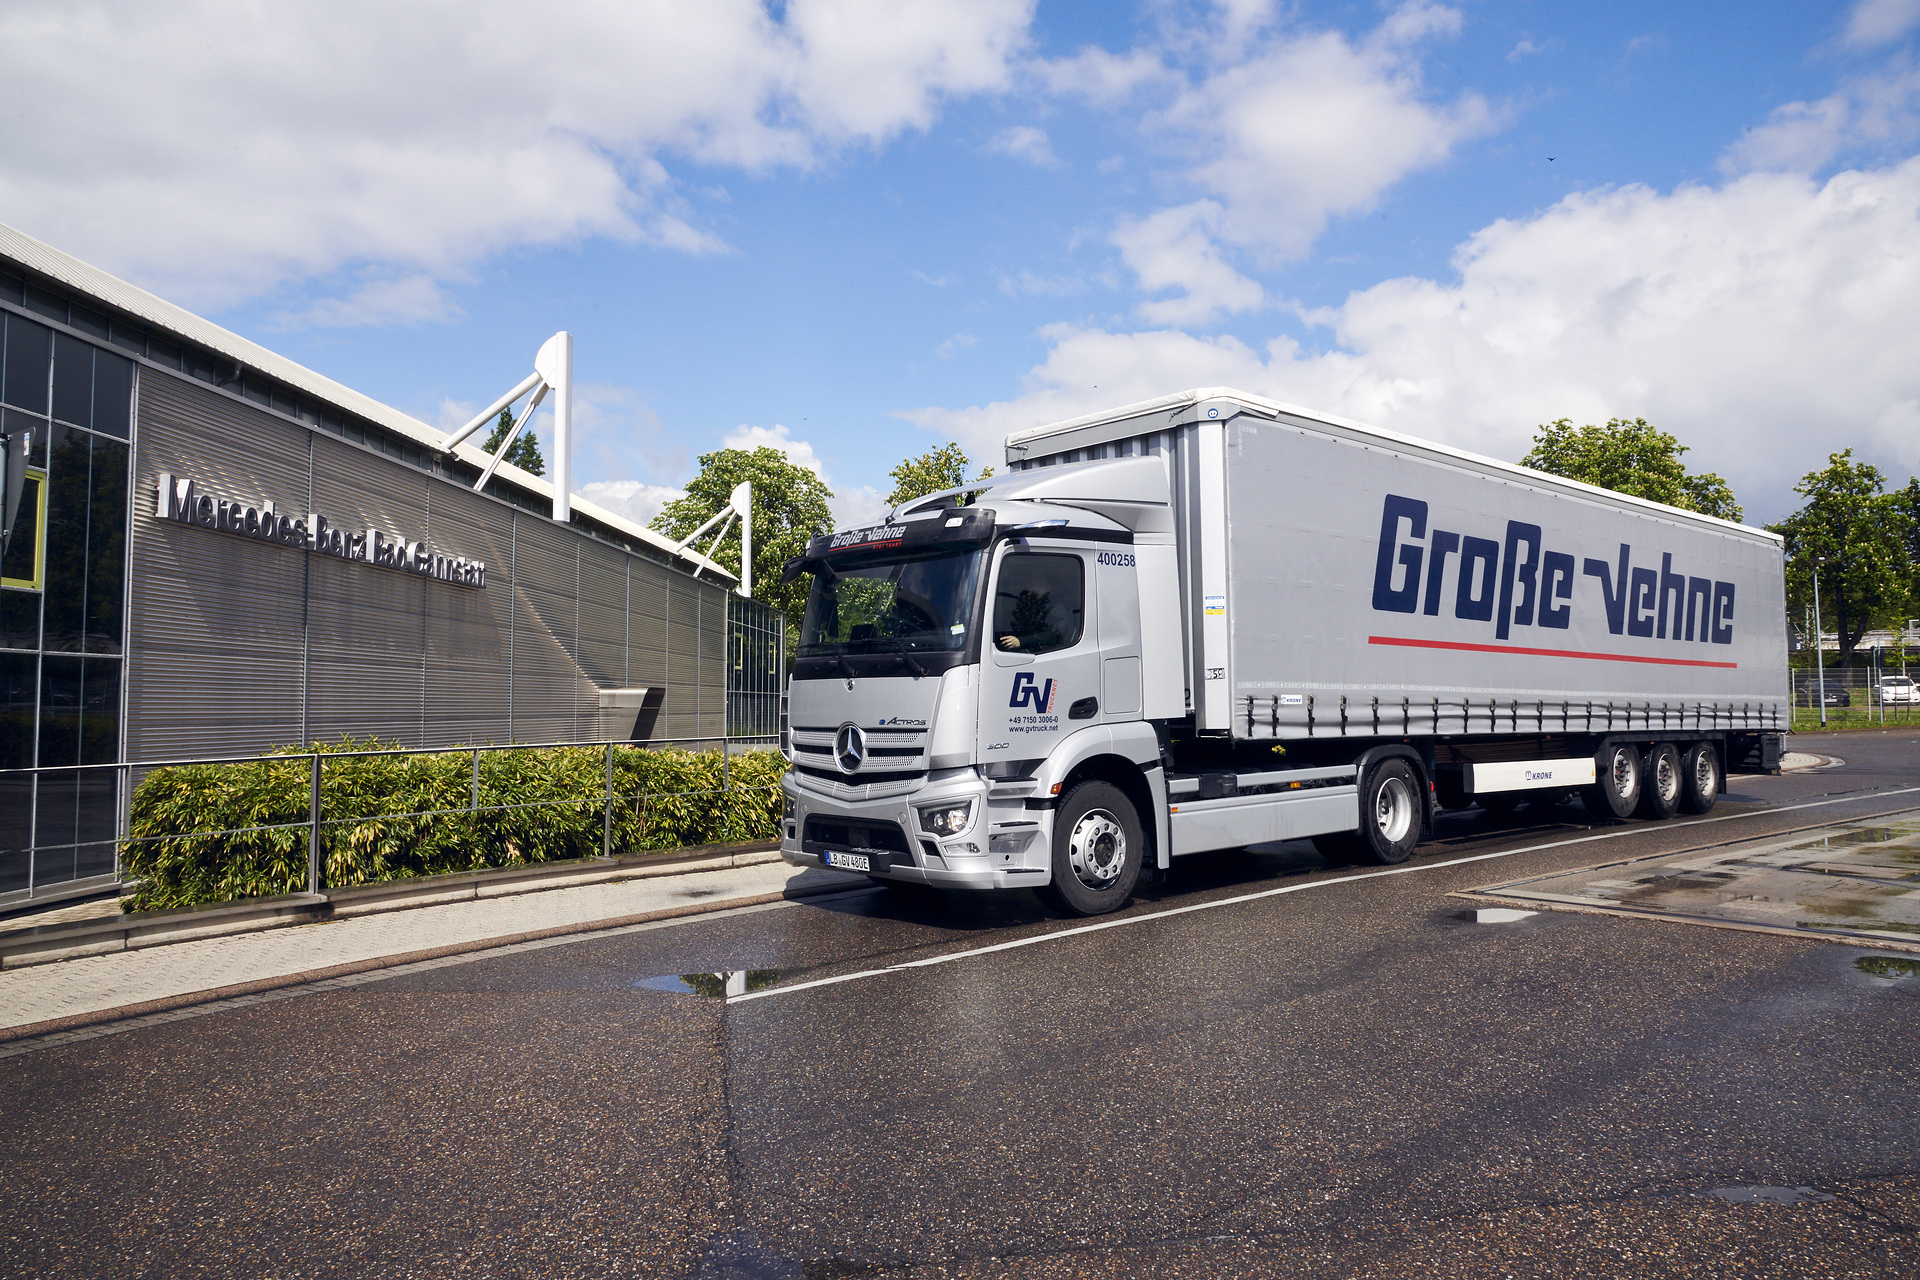 Mercedes-Benz Trucks customer Große-Vehne is actively pushing the drive transition forward